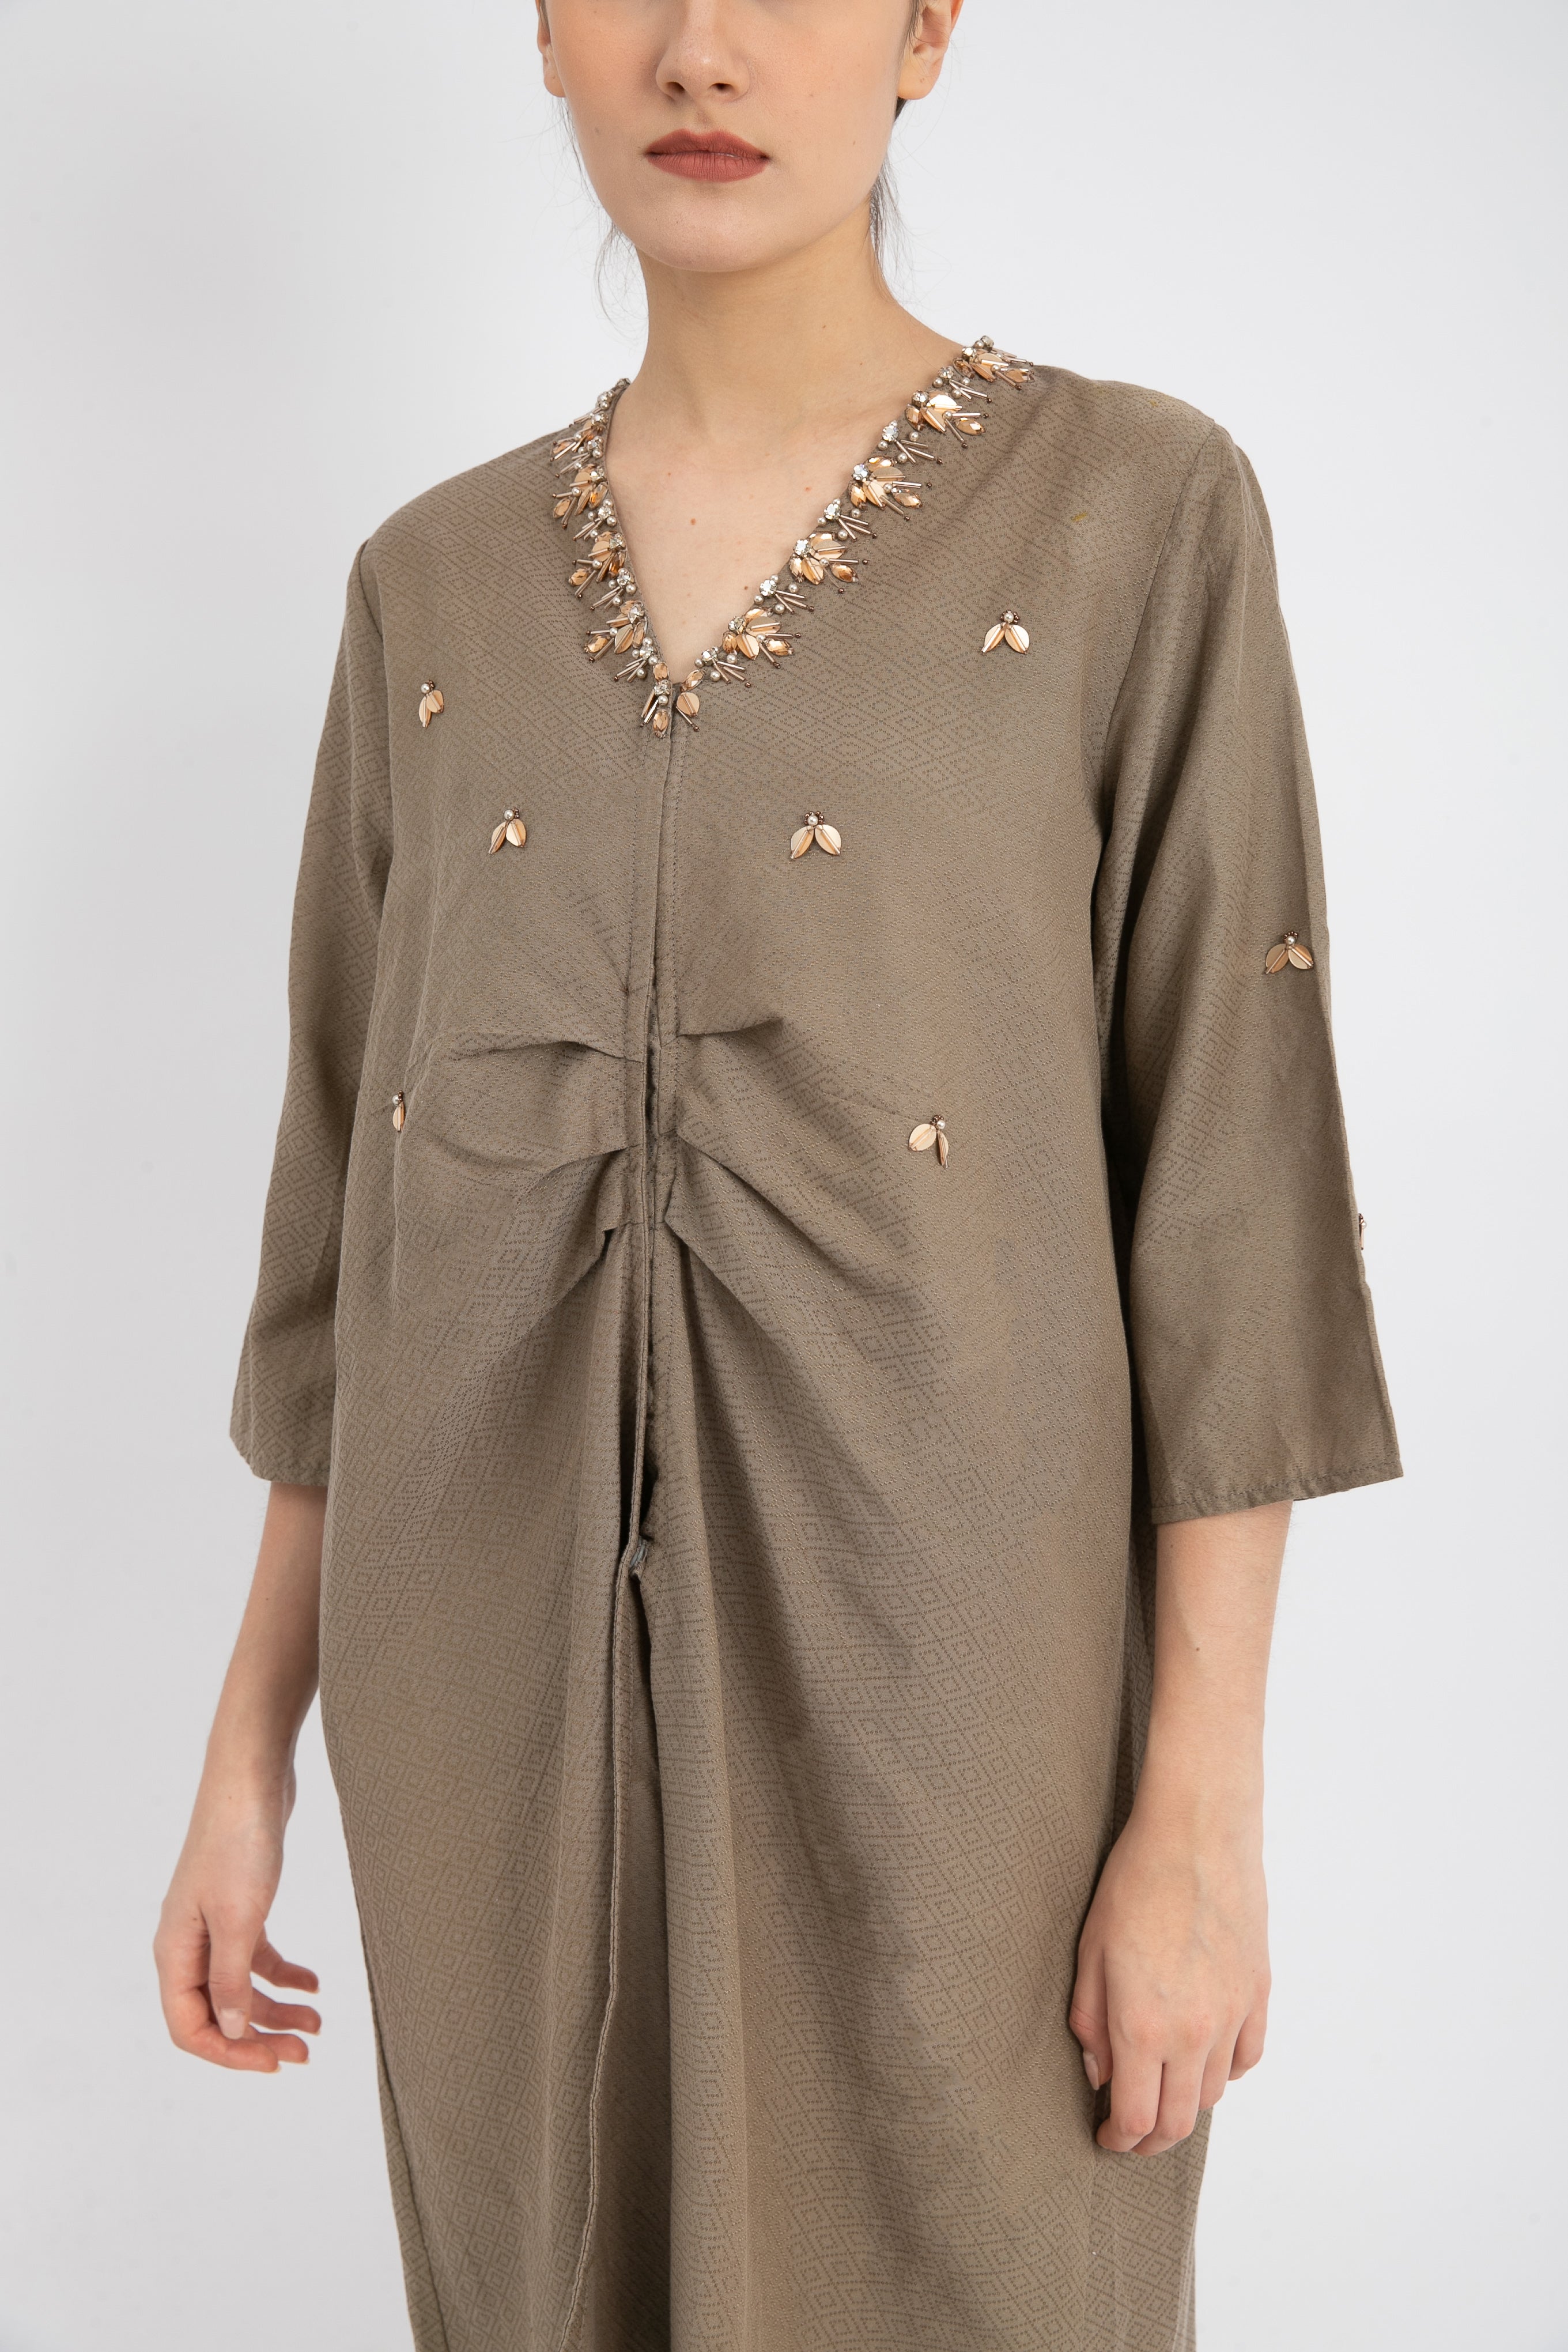 Avra Dress in Taupe